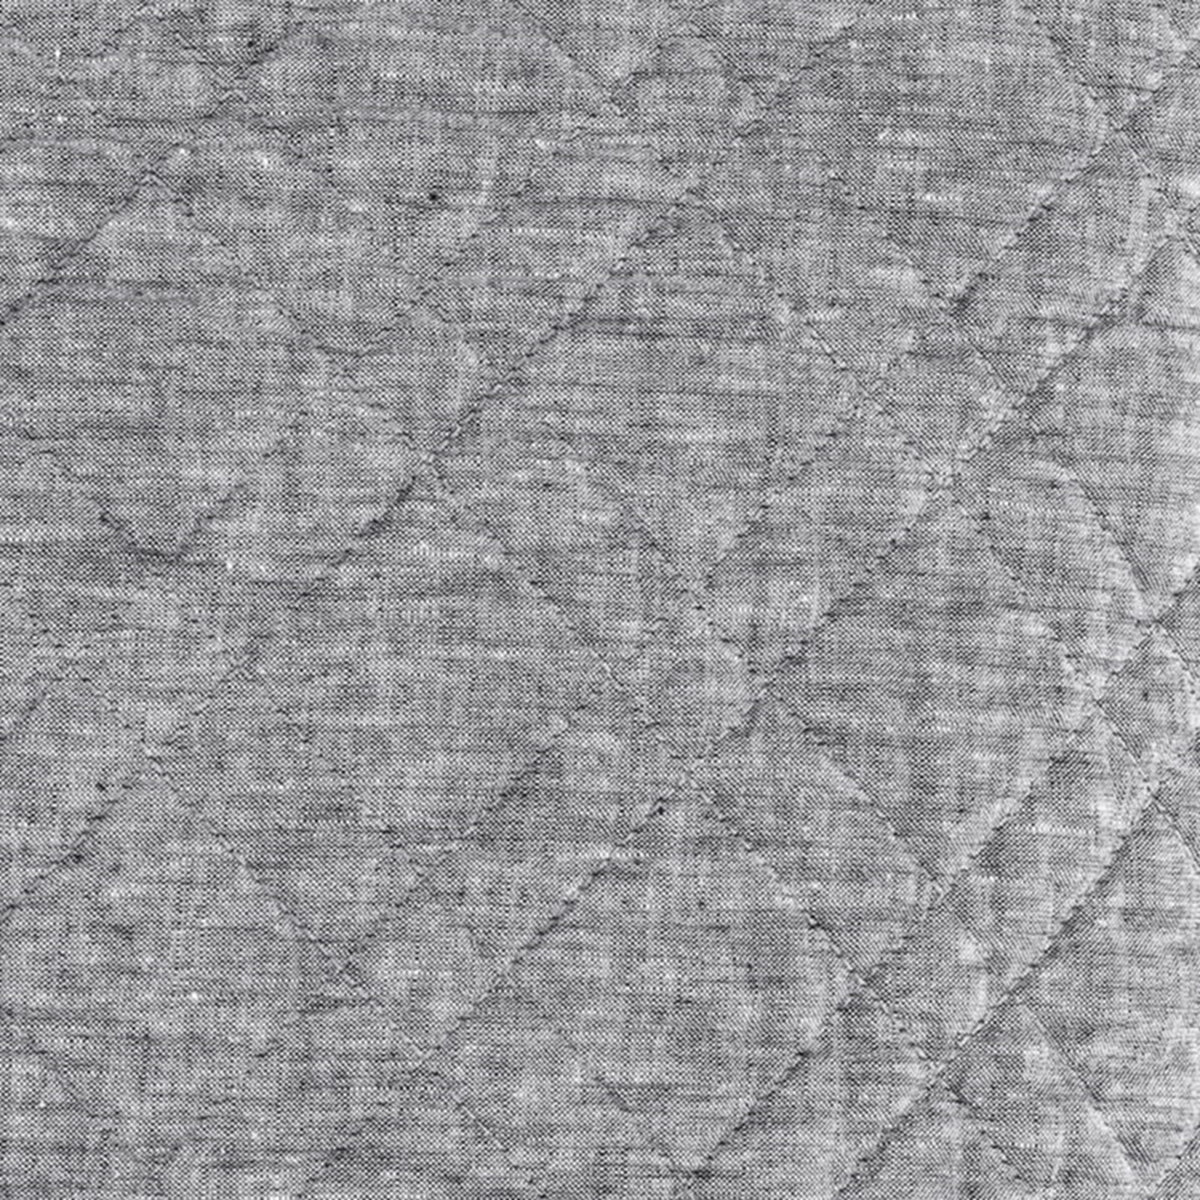 Swatch Sample of Pine Cone Hill Washed Linen Quilted Bedding in Color Black